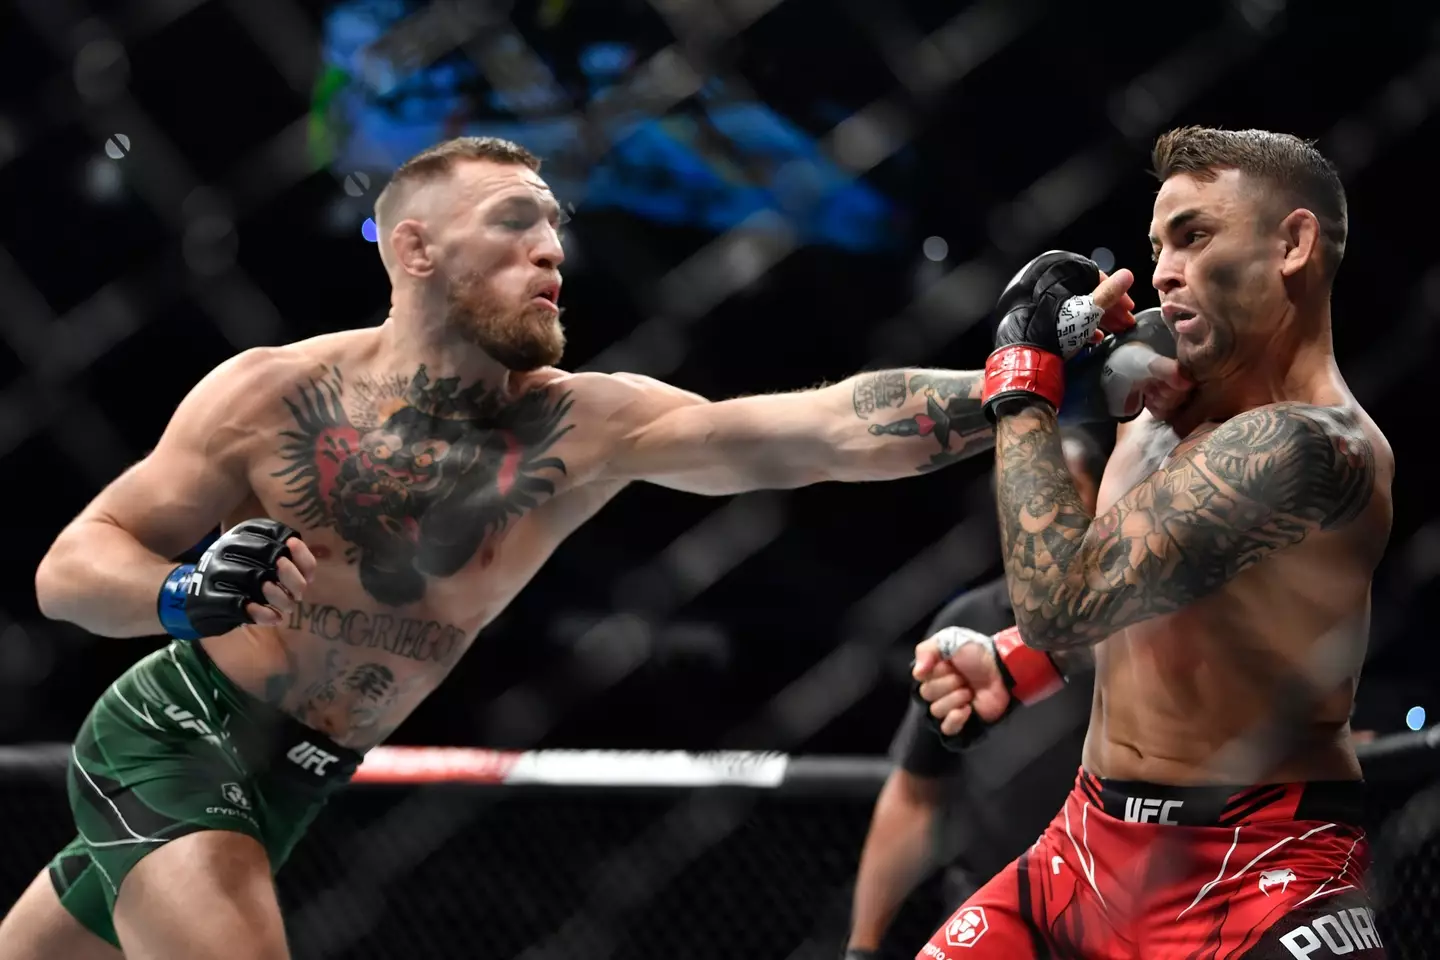 Conor McGregor during his fight against Dustin Poirier at UFC 264. Image: Getty